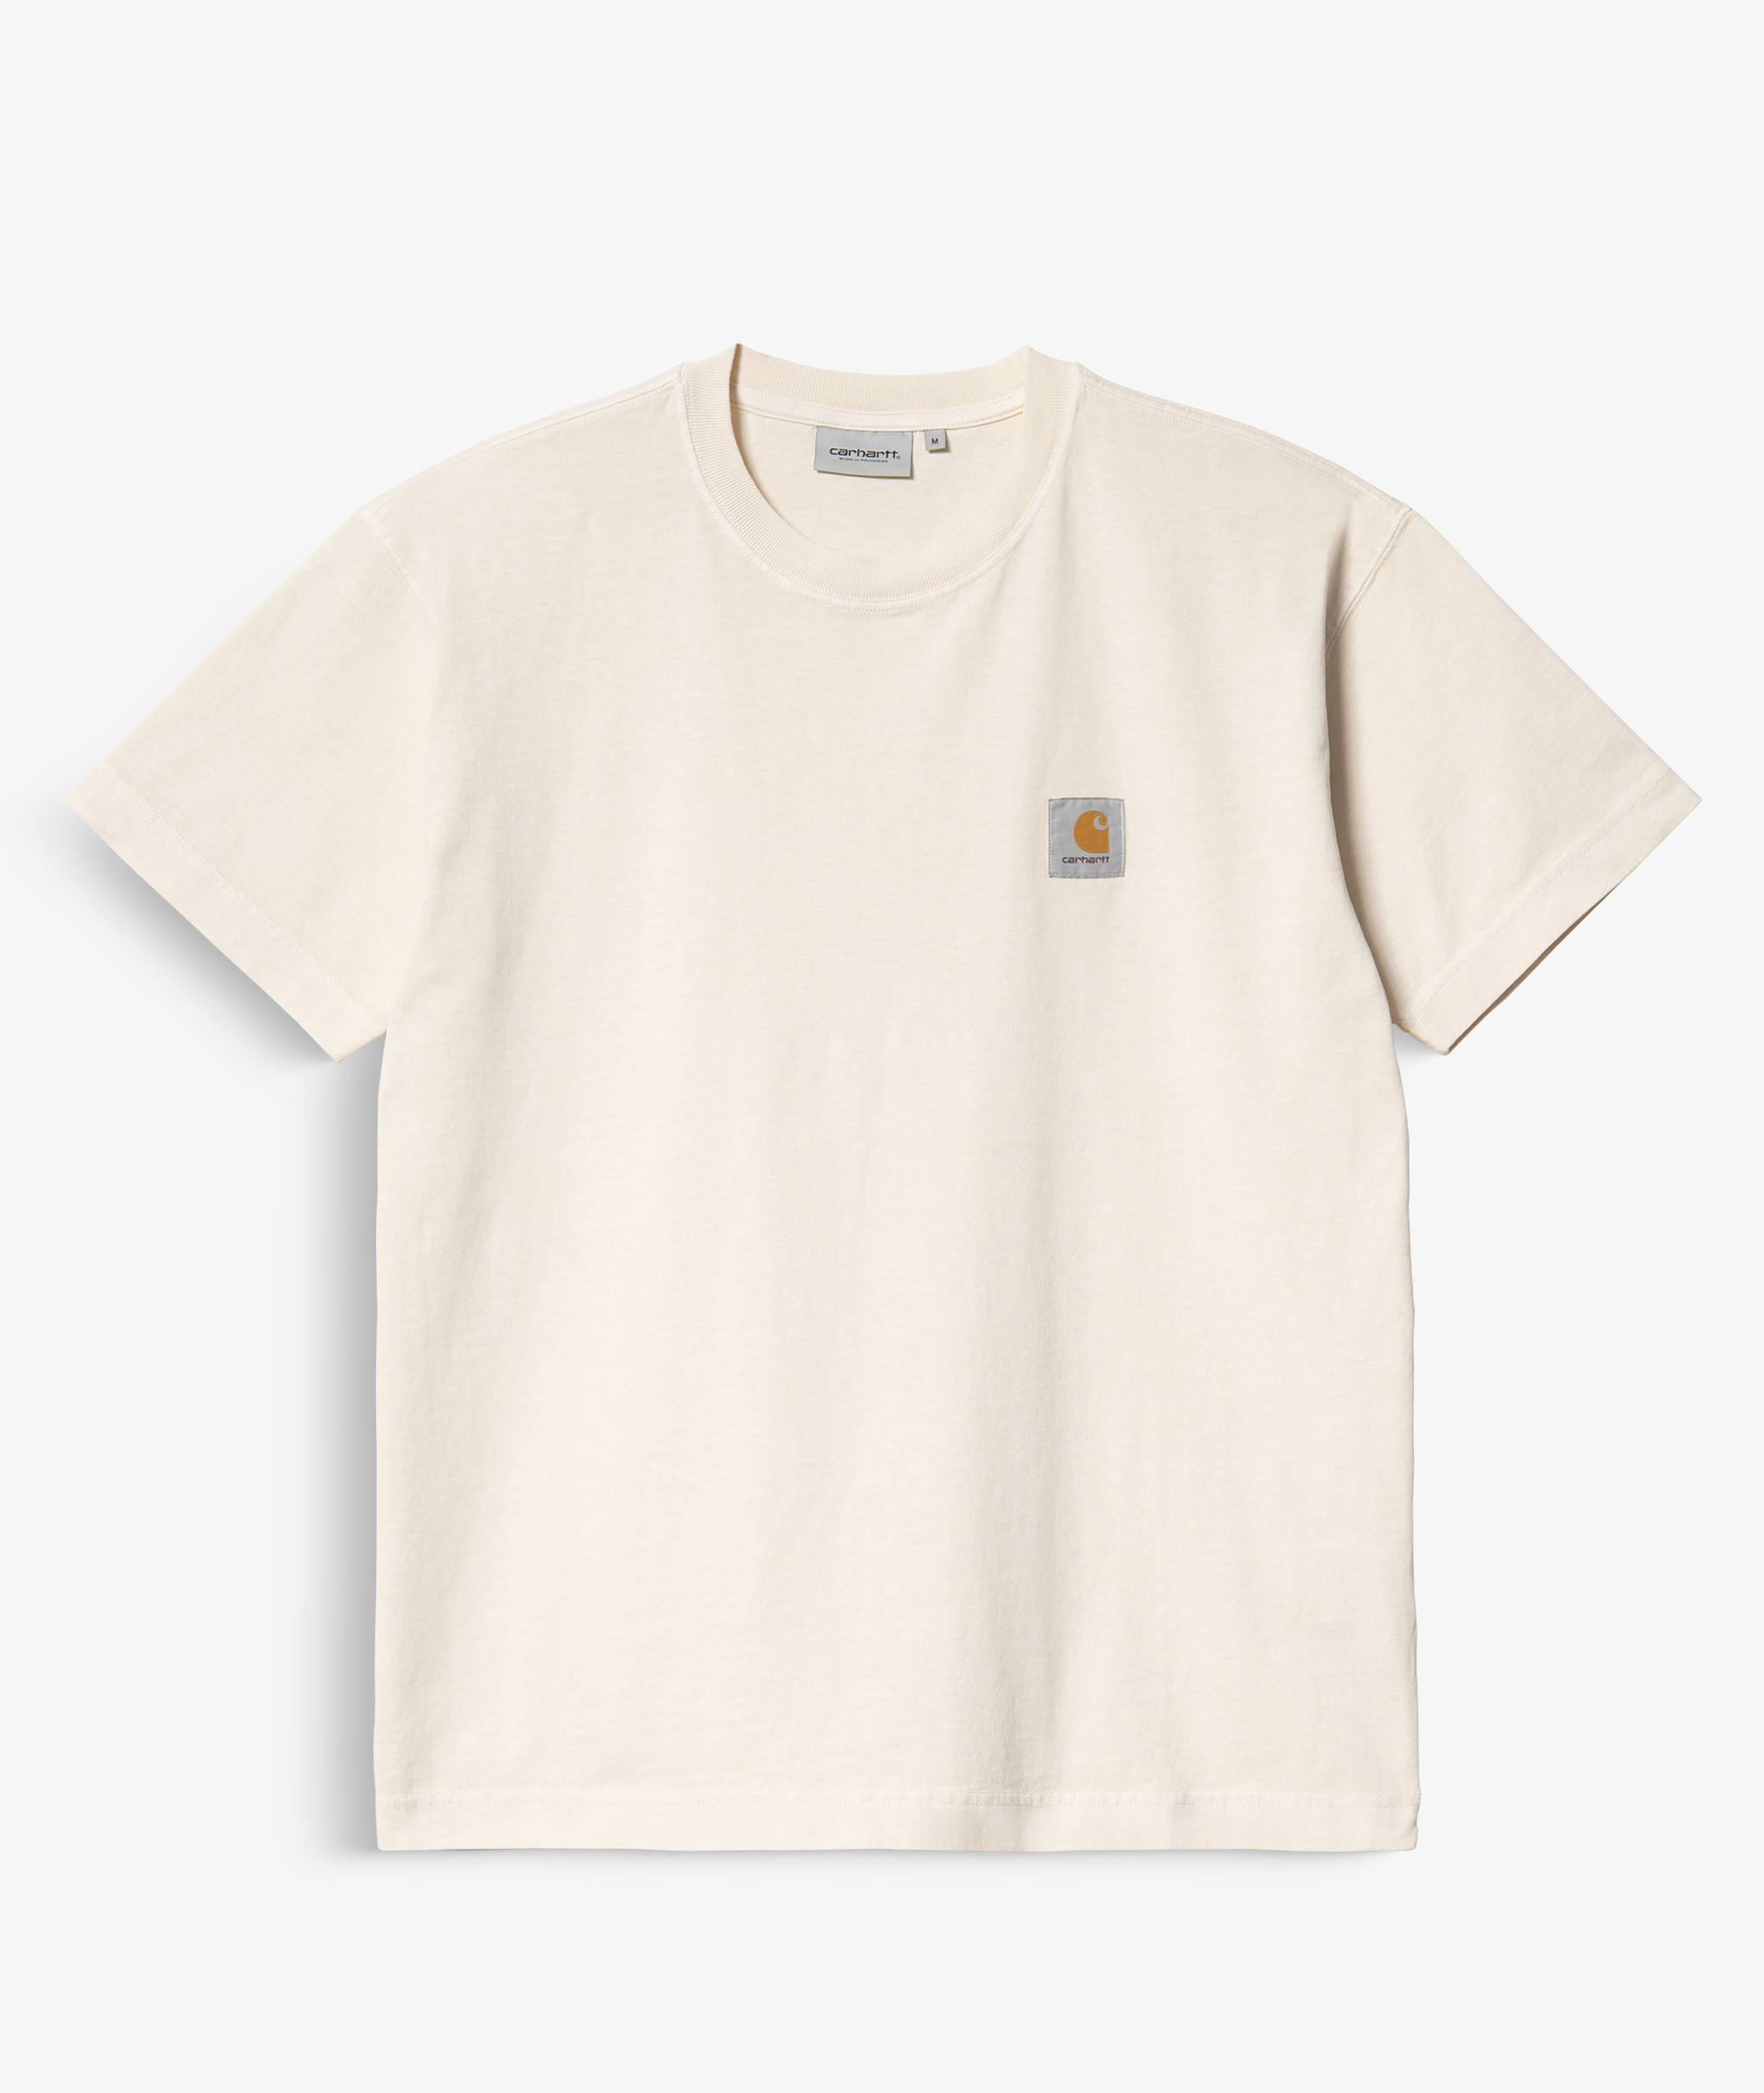 Norse Store Shipping Worldwide - Carhartt S/S - Natural